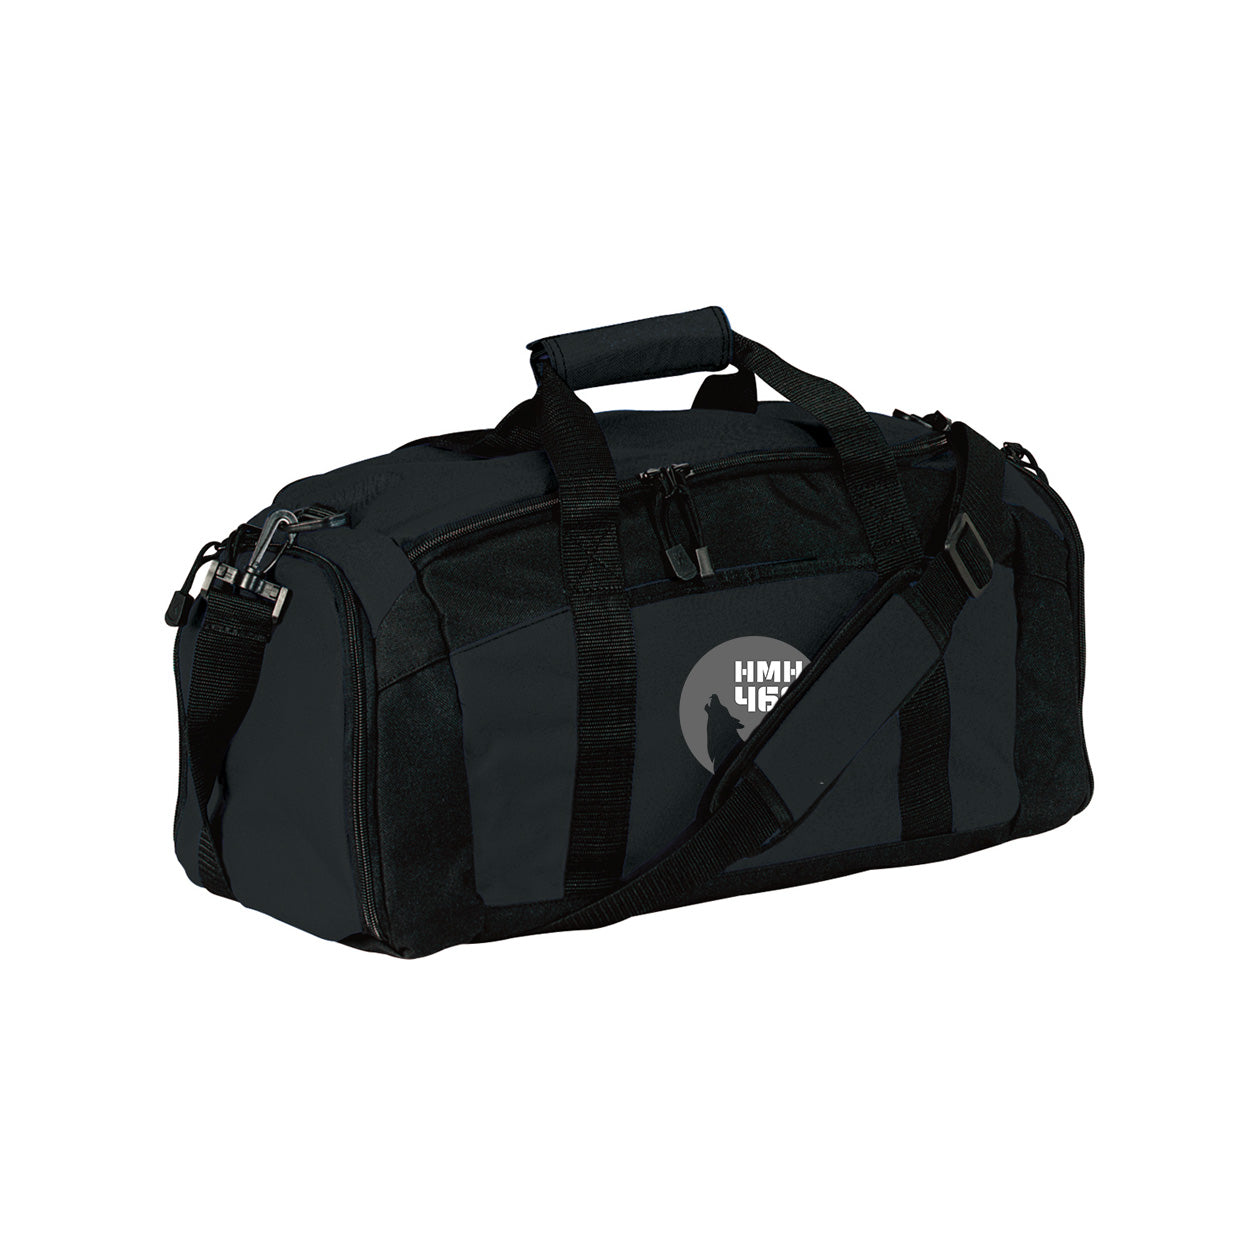 HMH-466 NIGHT EMBROIDERED PLAYER DUFFLE BAG